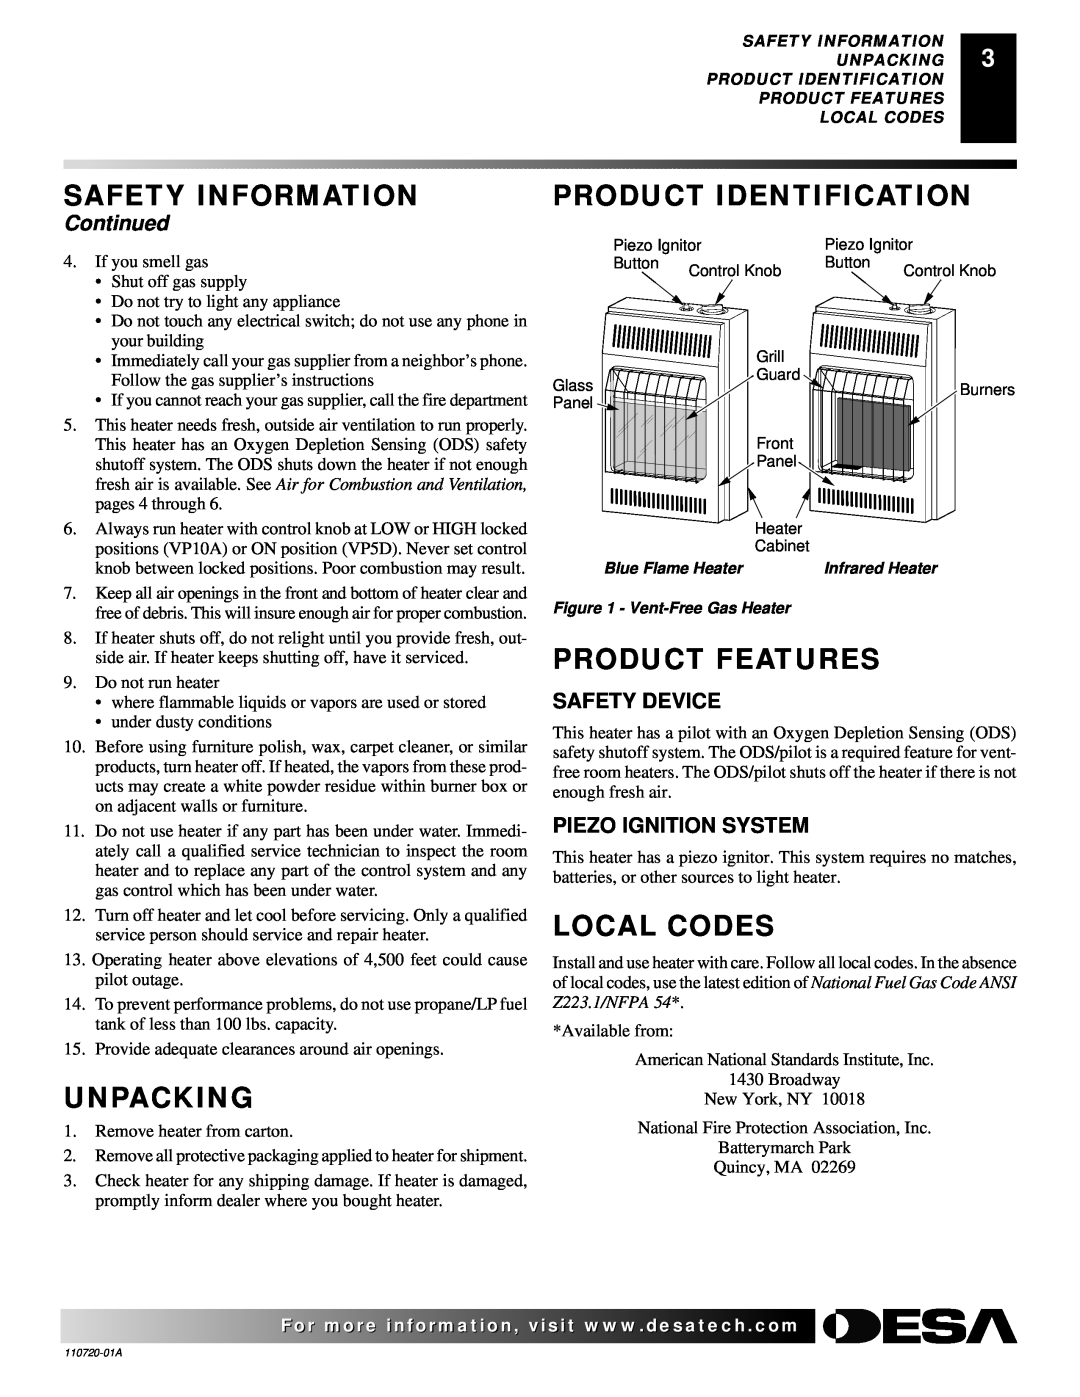 Desa VP10A Unpacking, Product Identification, Product Features, Local Codes, Continued, Safety Device, Safety Information 